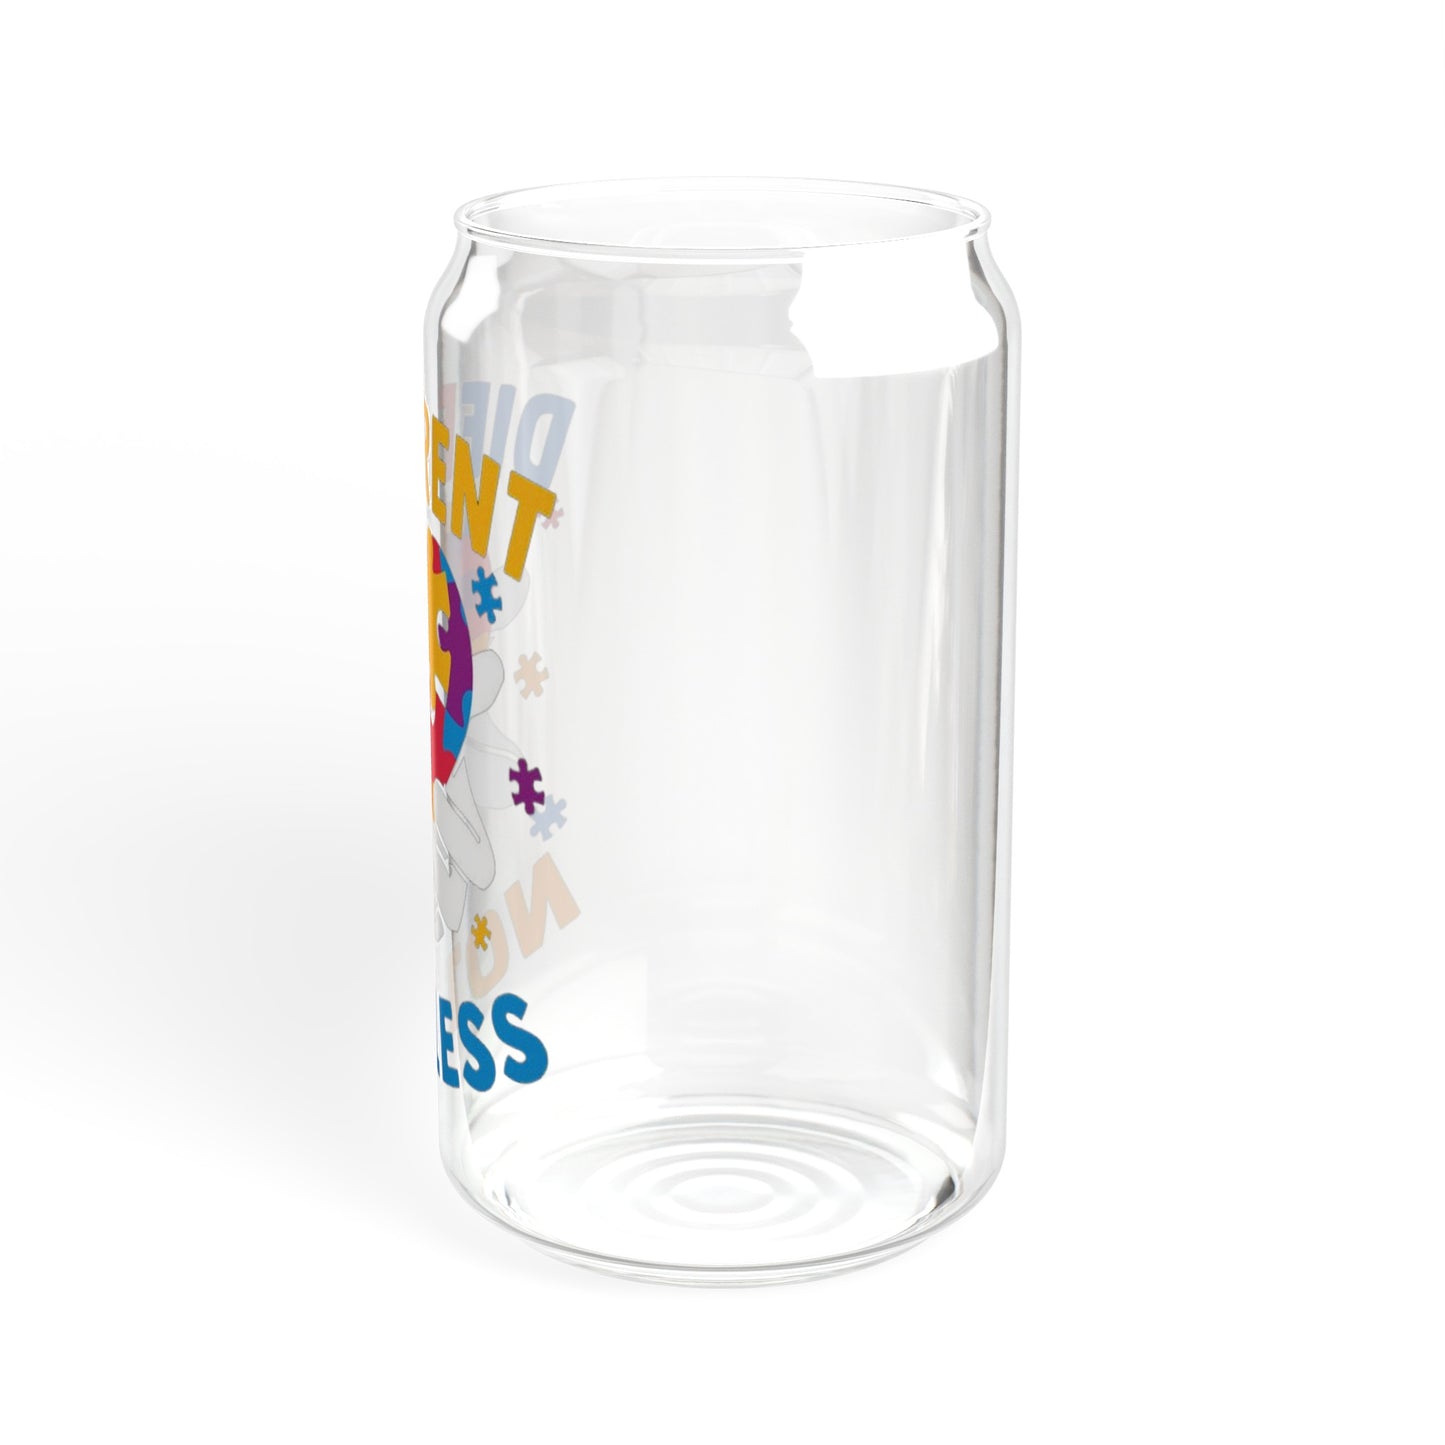 Different NOT Less - Sipper Glass, 16oz